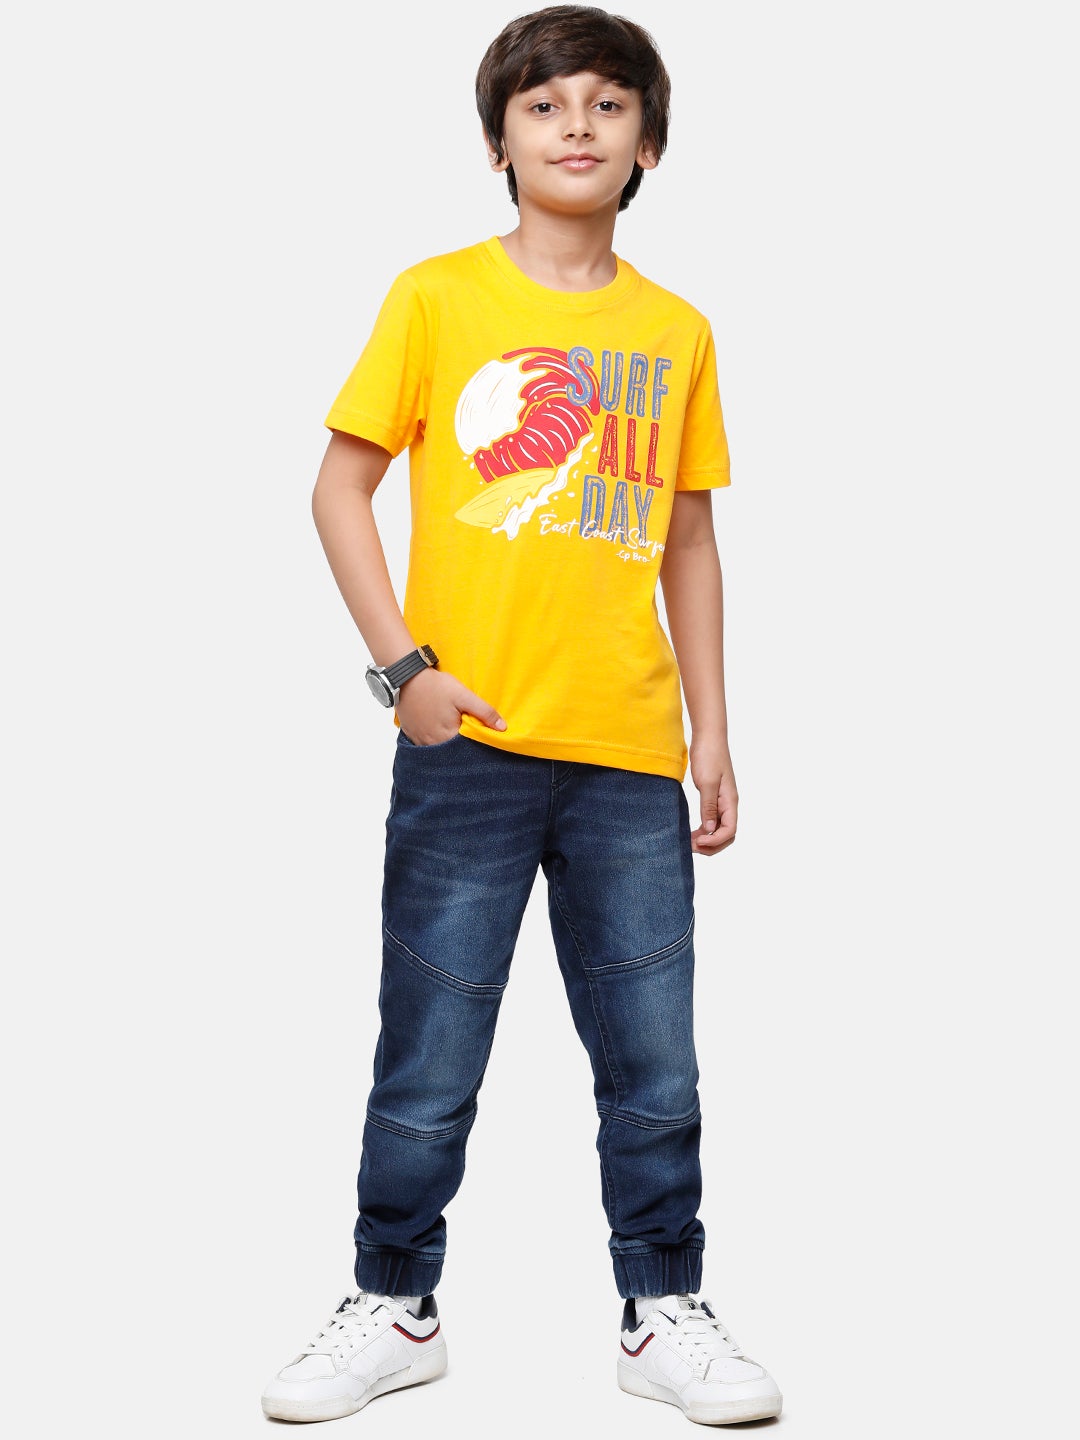 CP Boys Yellow Slim Fit Round Neck T-Shirt T-shirt Classic Polo 